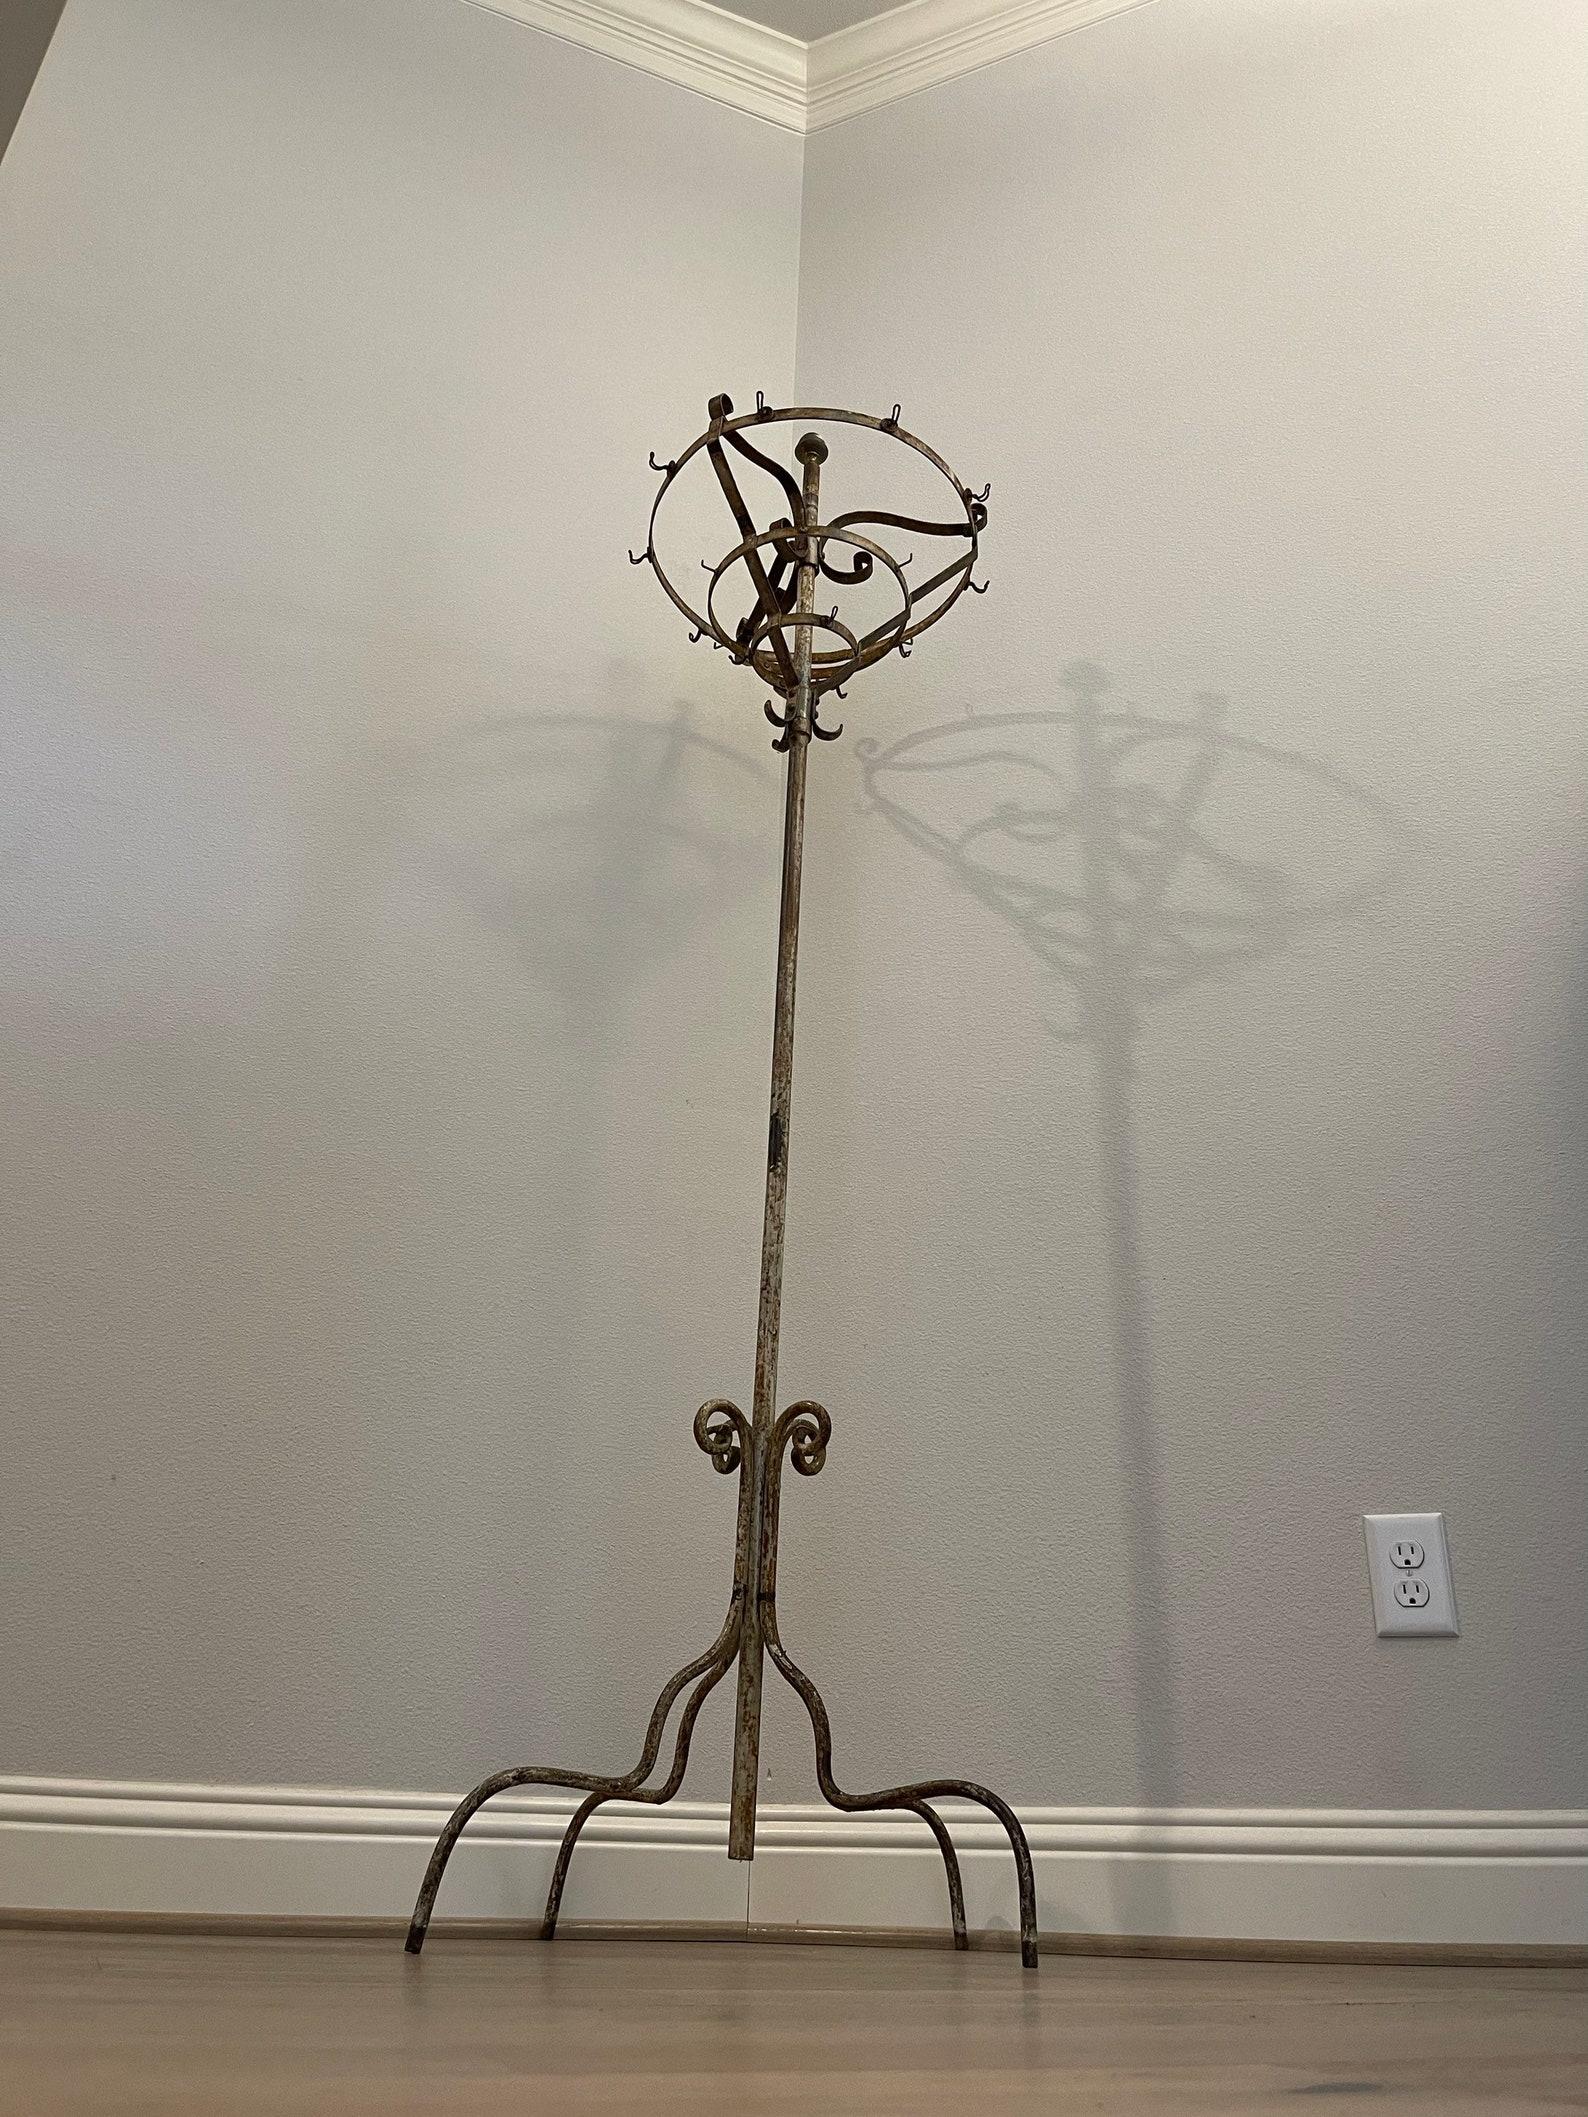 A scarce tall antique French industrial hotel rounder coat rack stand. 

Born in France in the late 19th century, highly desirable and sought after, featuring rustic forged wrought iron construction, strong and sturdy utilitarian design with a touch